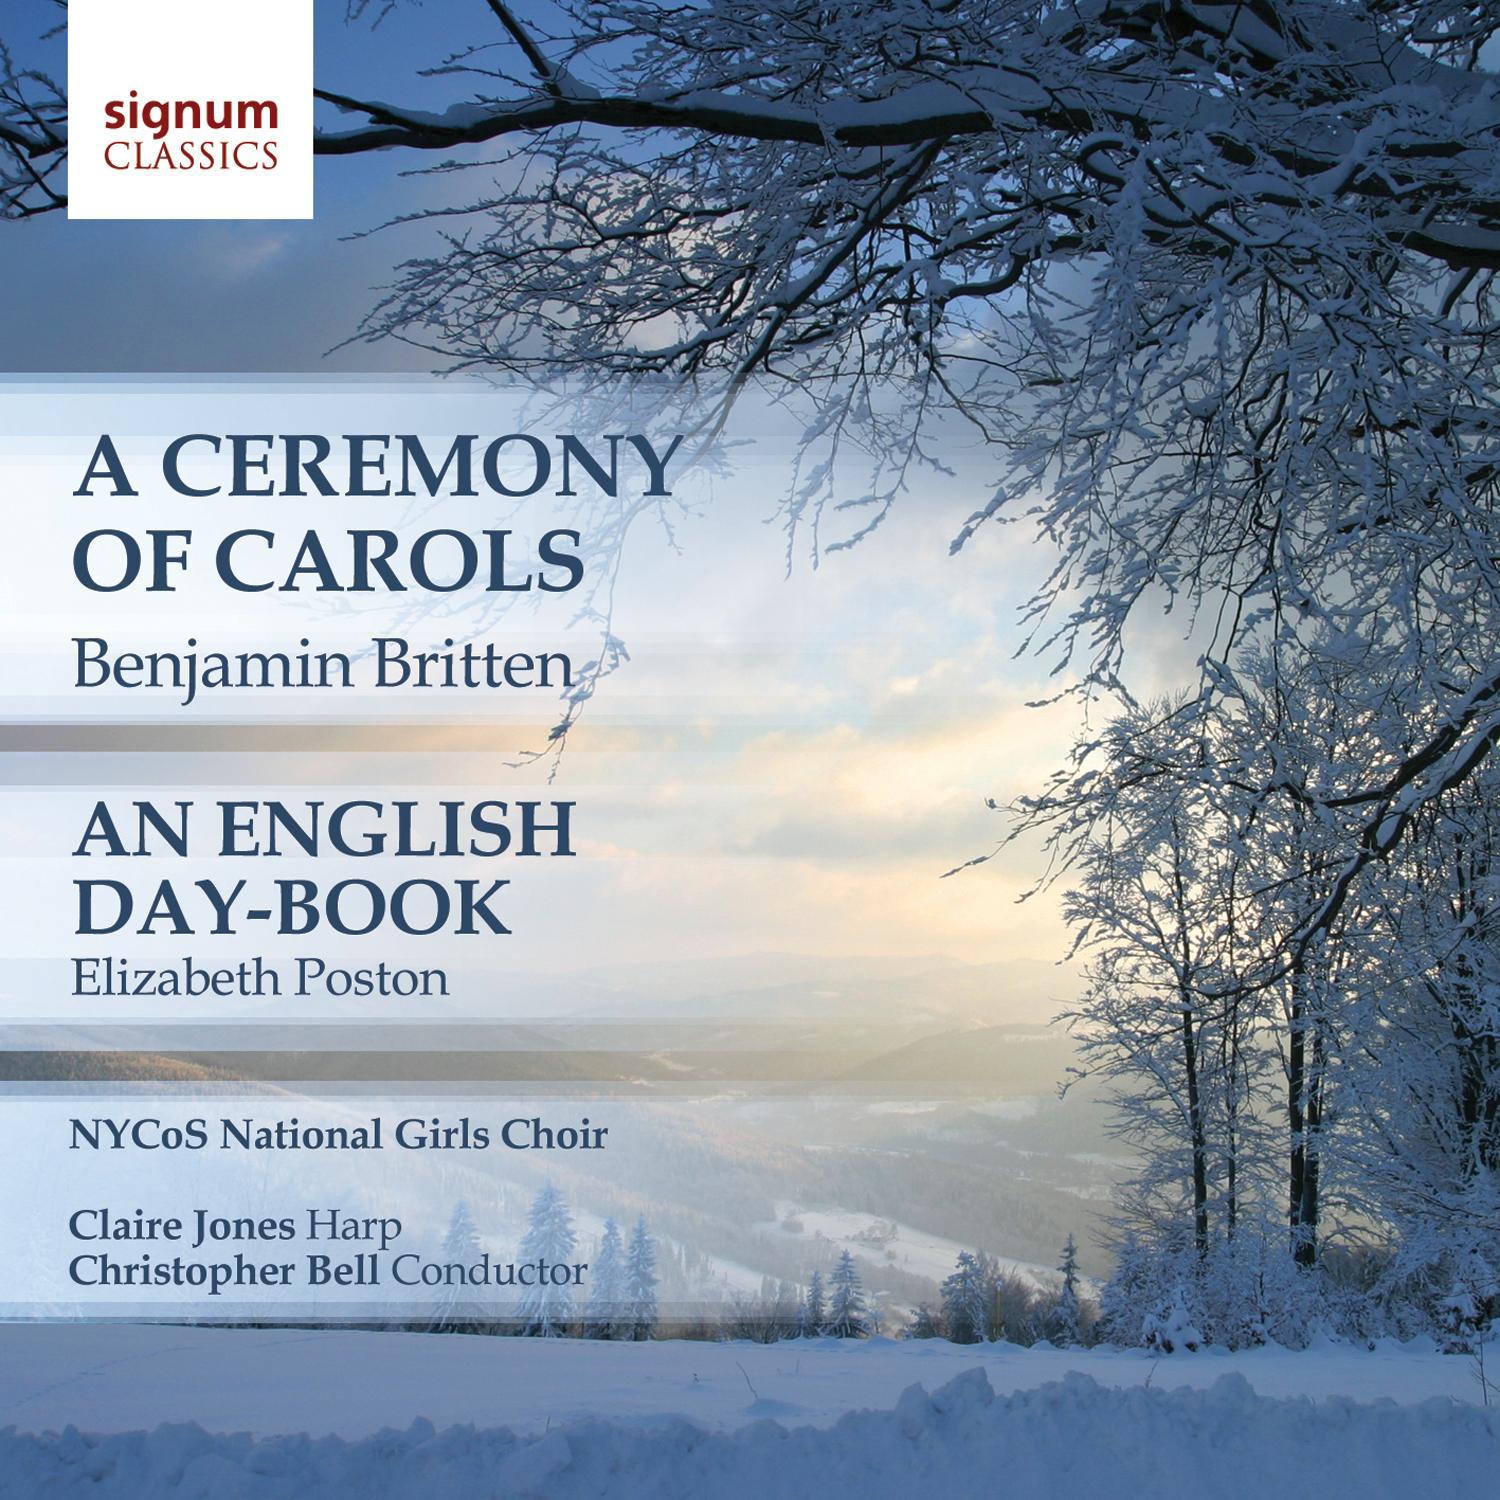 A Ceremony of Carols, An English Day-Book